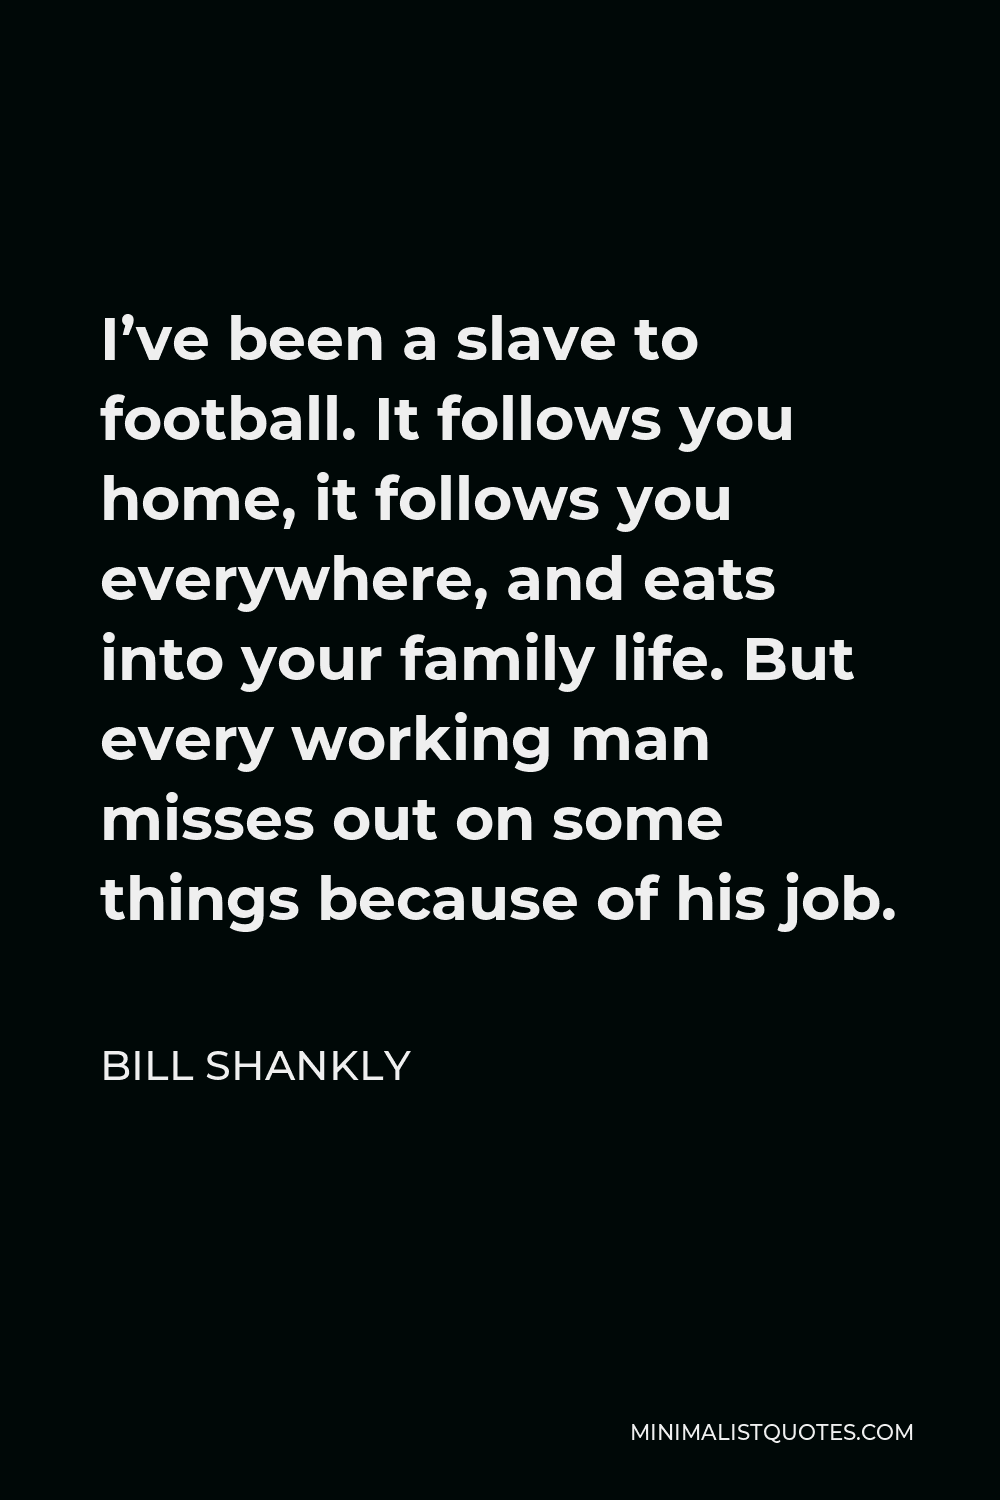 Bill Shankly Quote - I’ve been a slave to football. It follows you home, it follows you everywhere, and eats into your family life. But every working man misses out on some things because of his job.